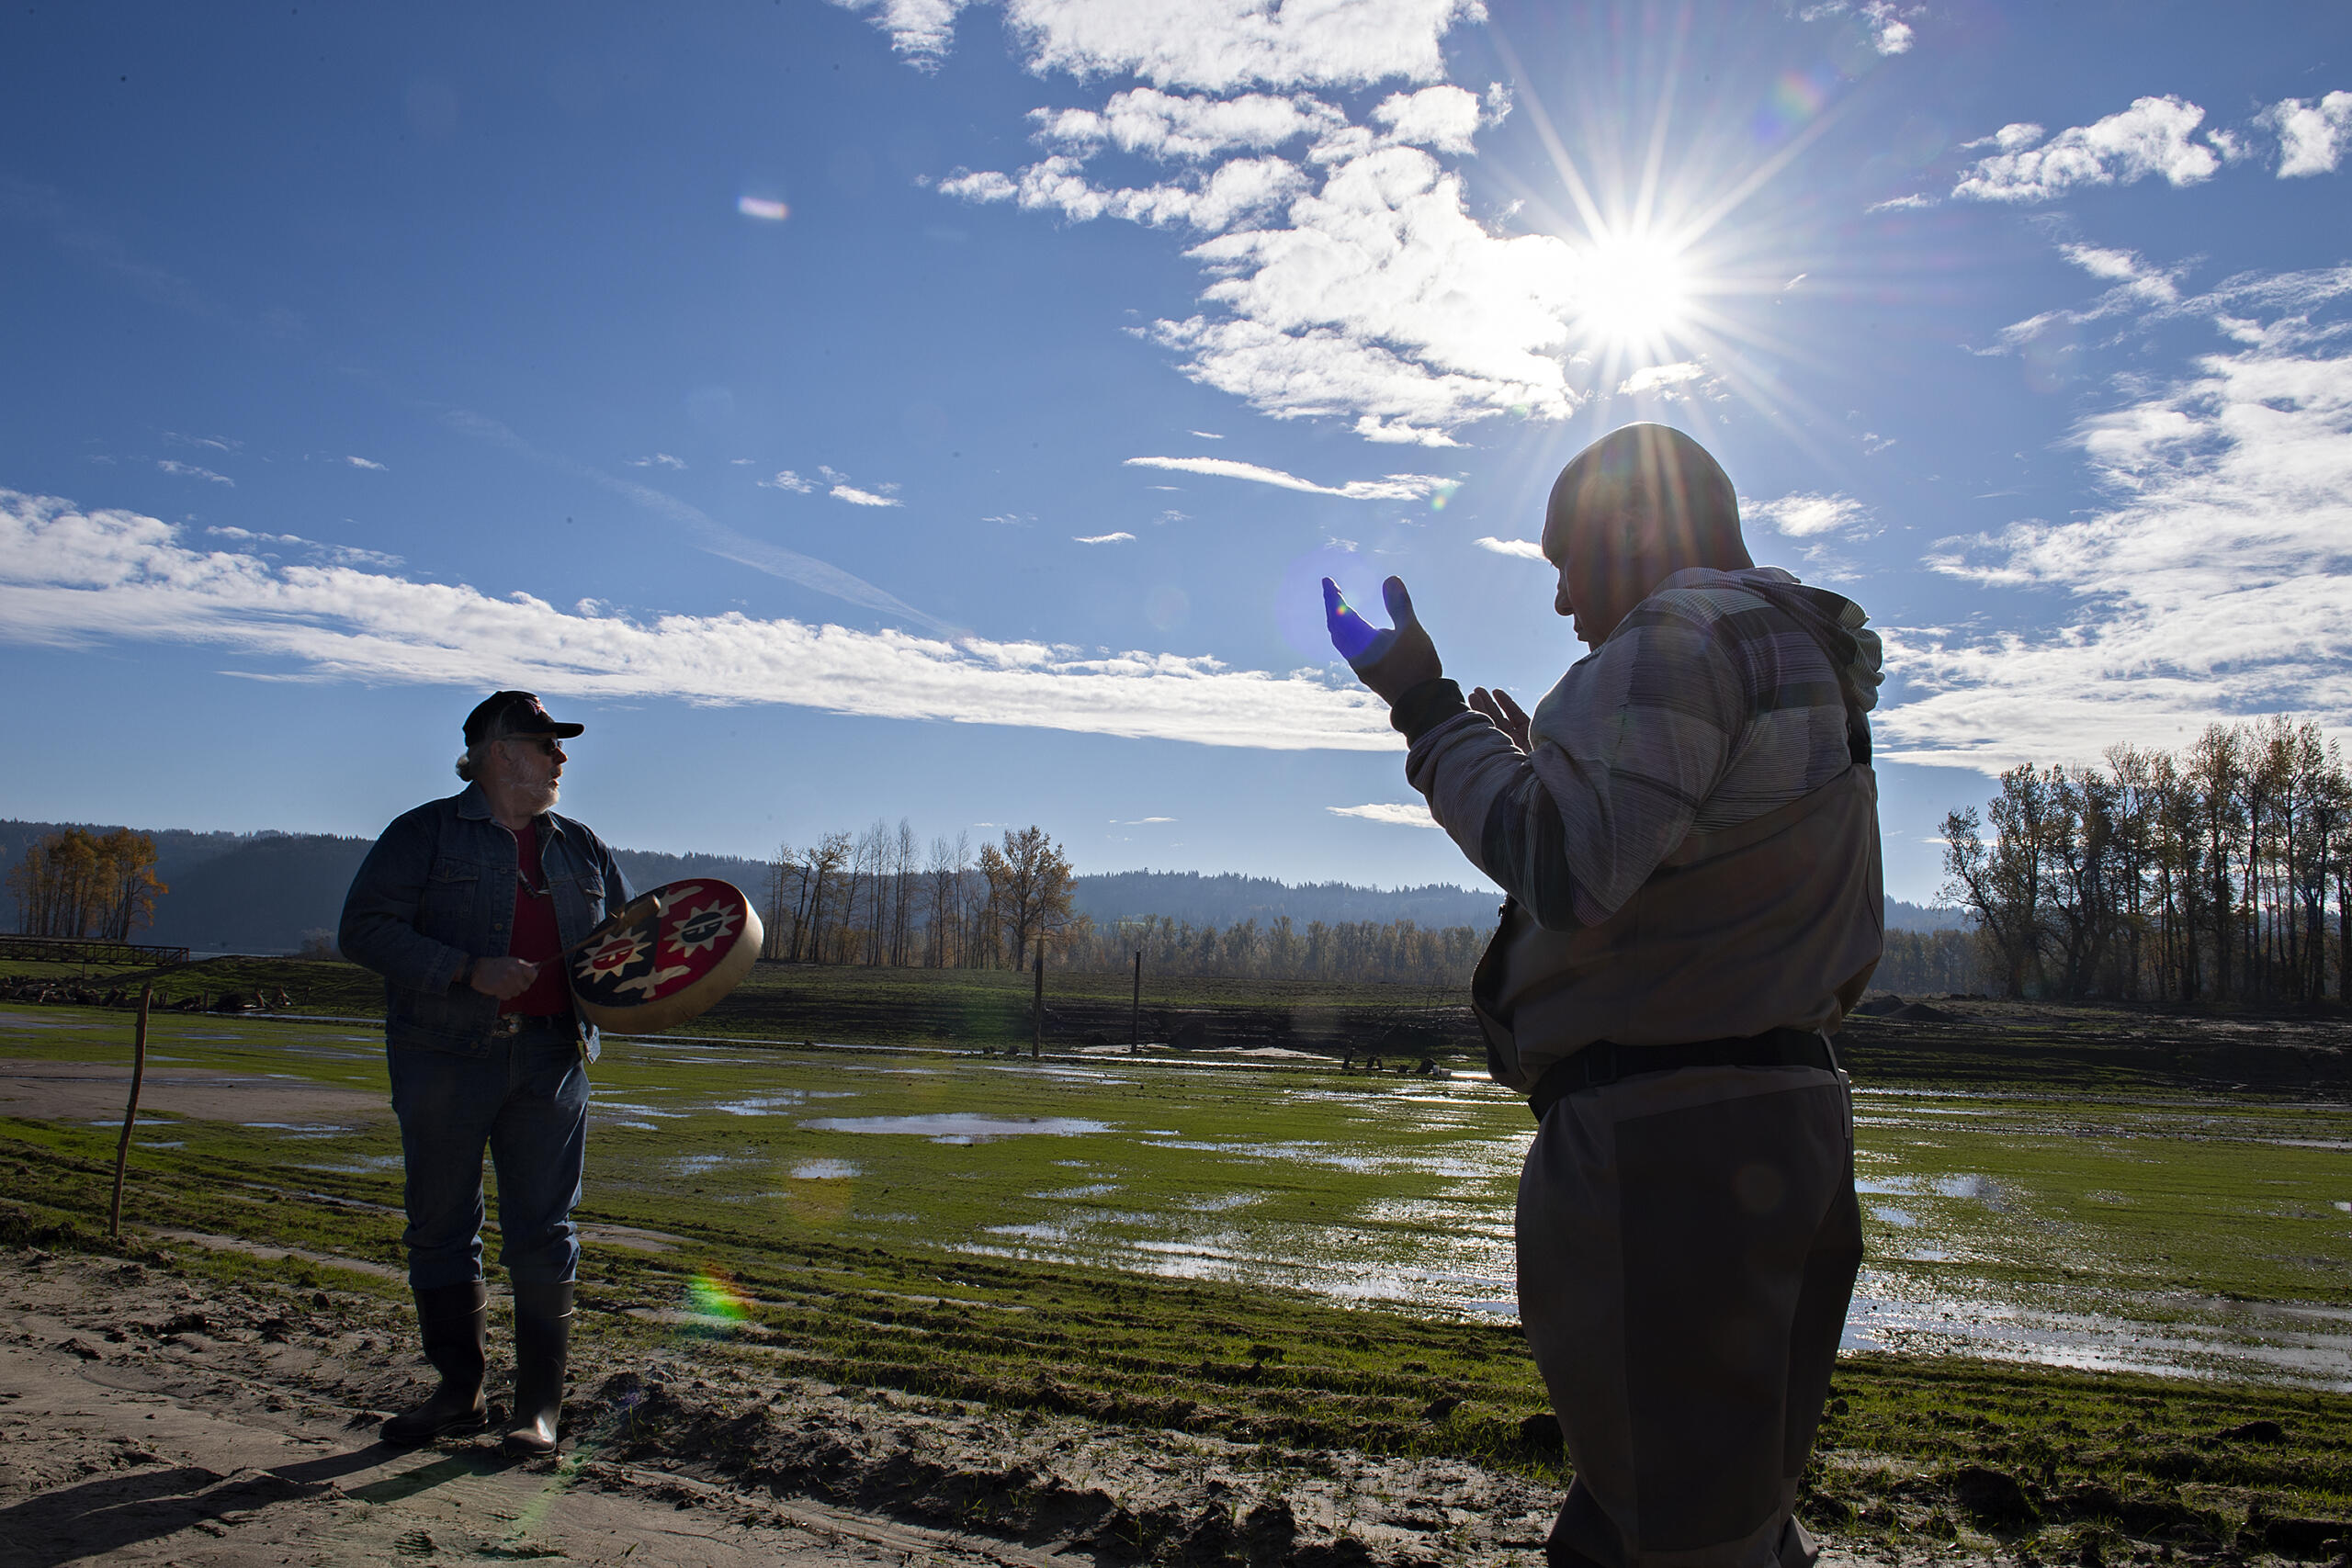 Sam Robinson, Chinook Indian Tribe vice chairman, left, performs the song "The Changer", which honors upcoming change, while joined by Alvey Seeyouma, a member of the Hopi Tribe working with the Lower Columbia Estuary Partnership, before the wapato planting at Steigerwald Lake National Wildlife Refuge on Monday afternoon, Nov. 22, 2021.